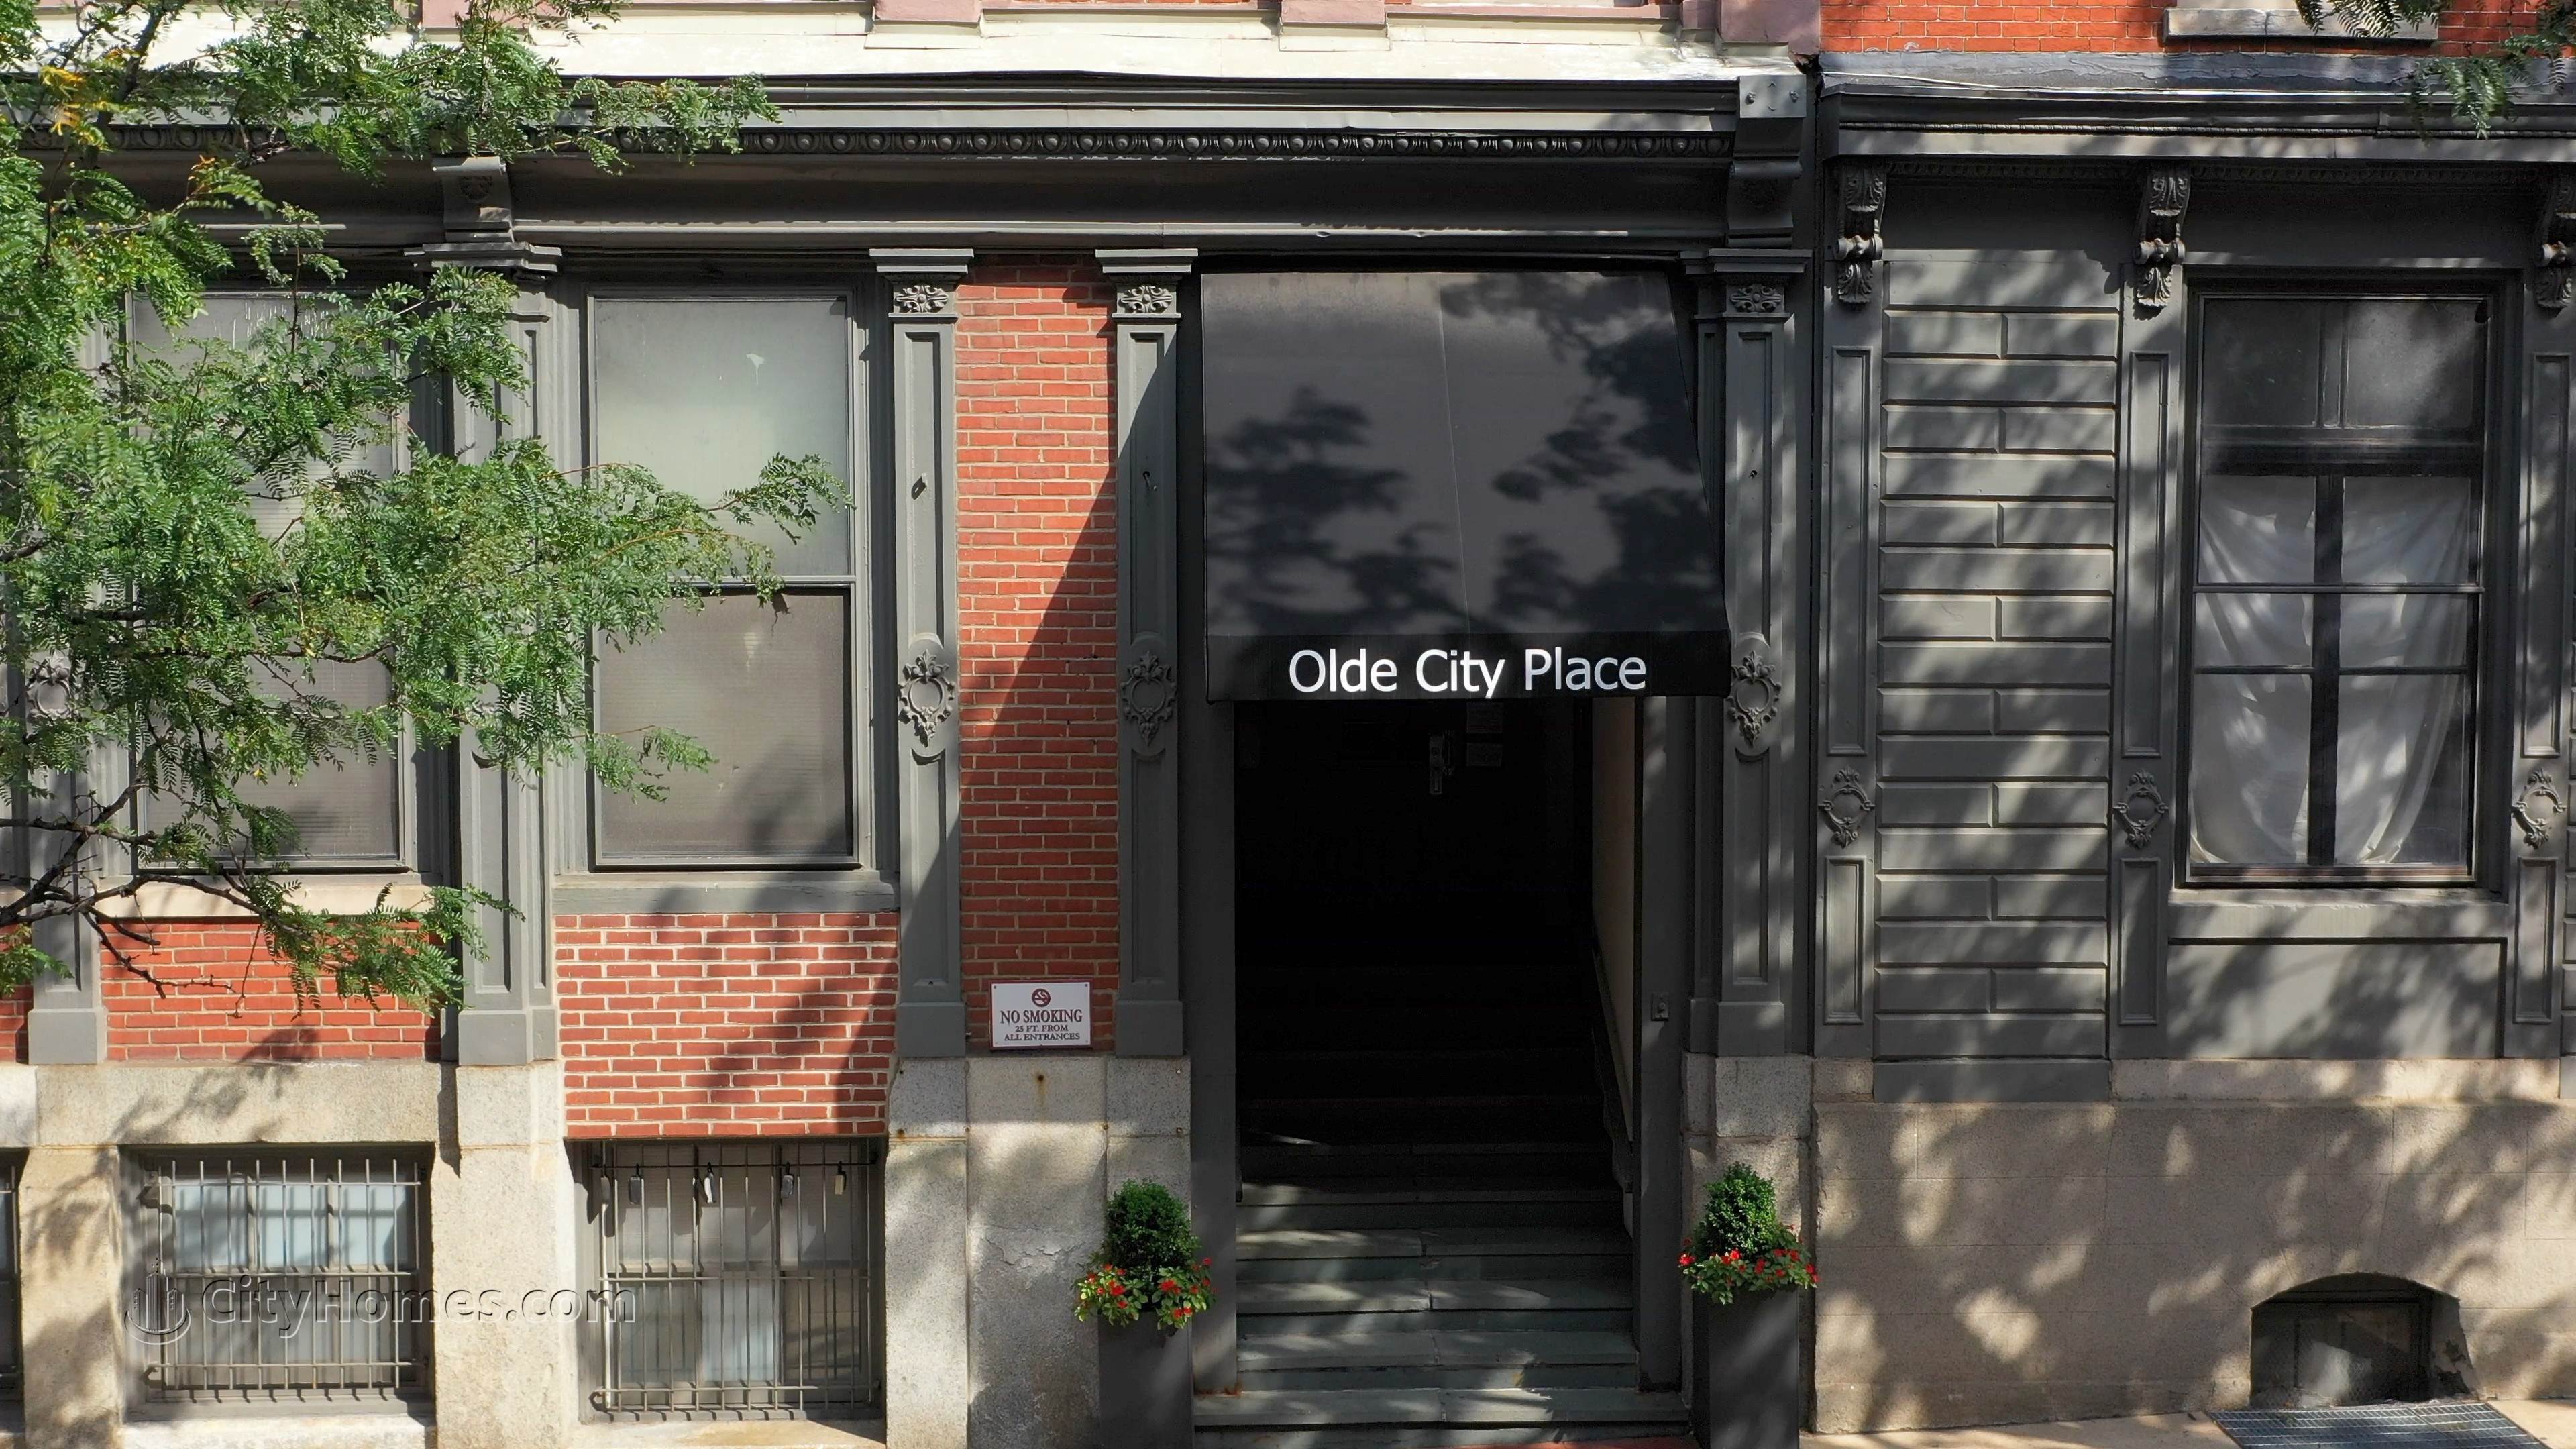 Olde City Place建於 205-11 N 4th St, Old City, 费城, PA 19106